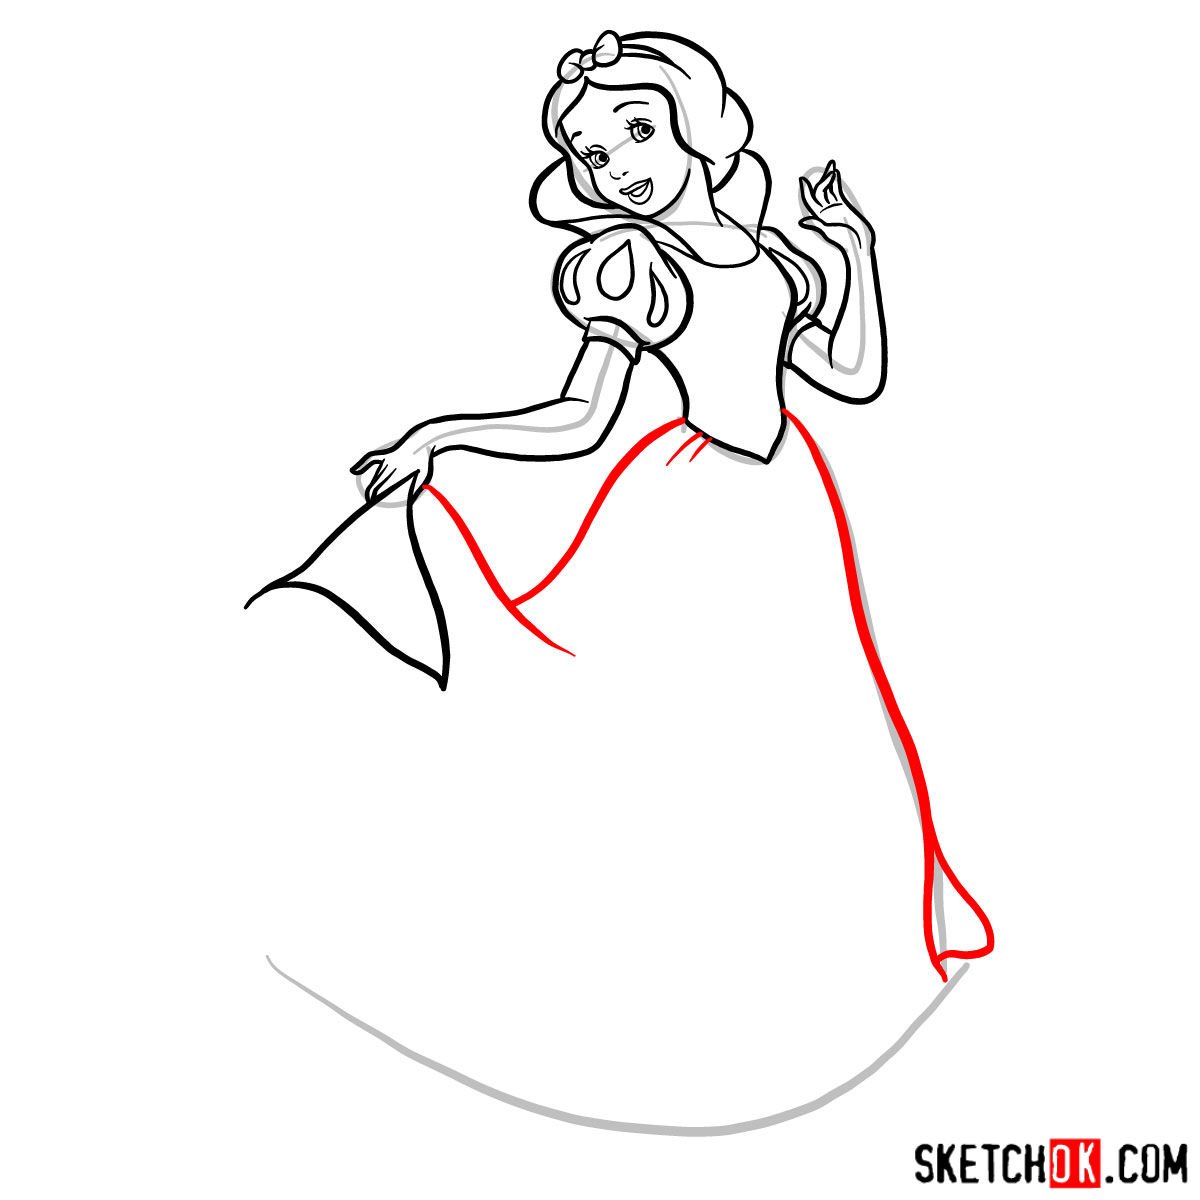 How to draw Snow White - step 10